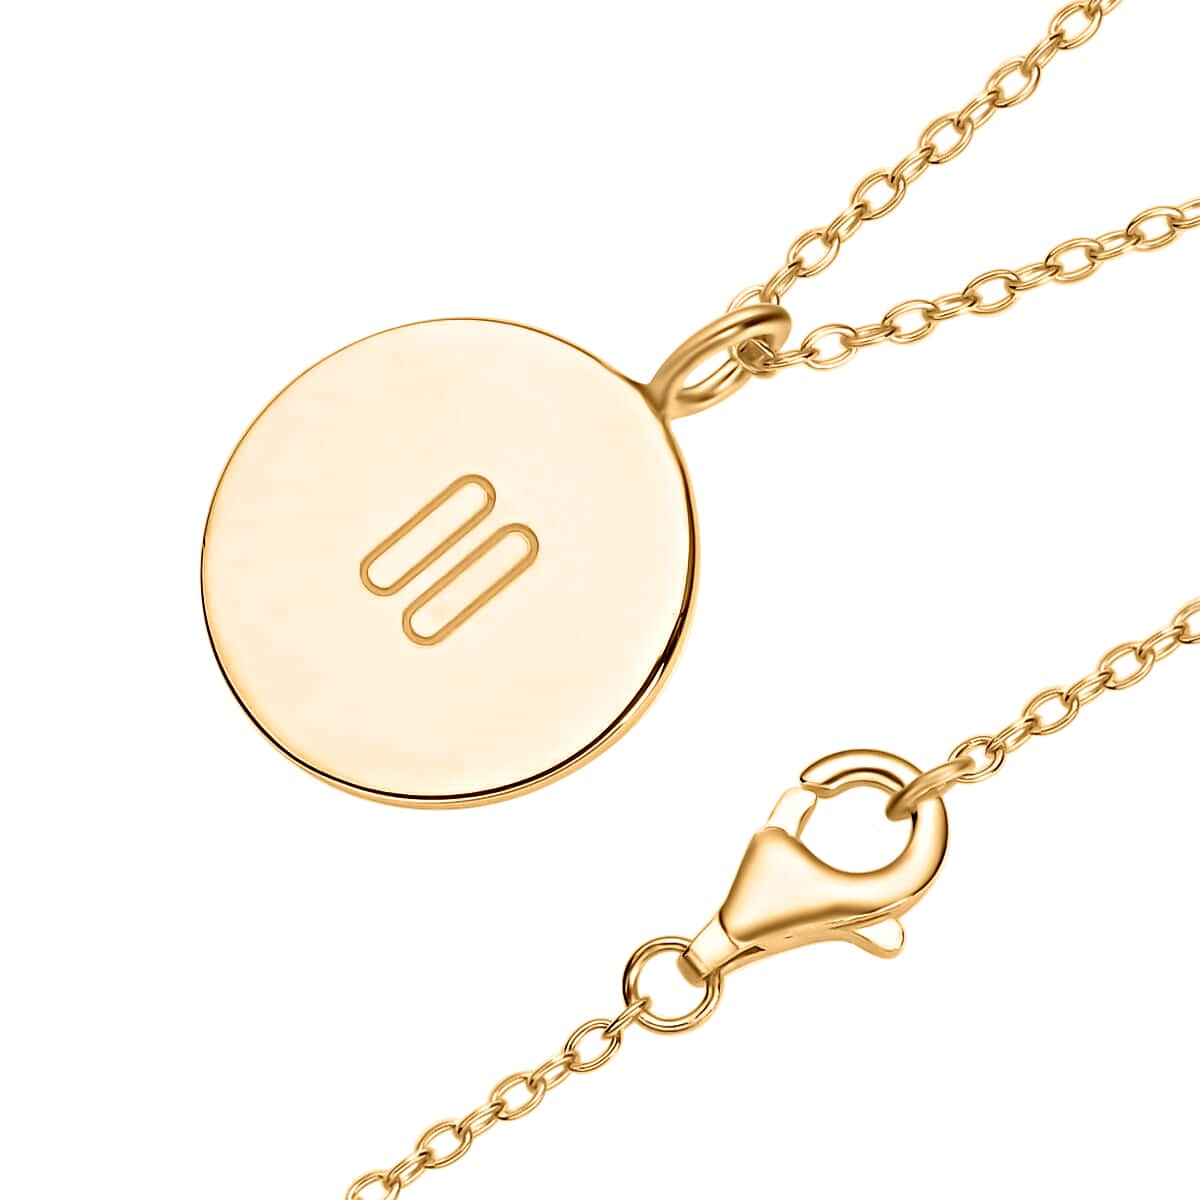 Dainty Pause Sign Pendant Necklace, 16-18 Inch Adjustable Necklace, 14K Yellow Gold Over Sterling Silver Pendant Necklace 3.90 Grams image number 4